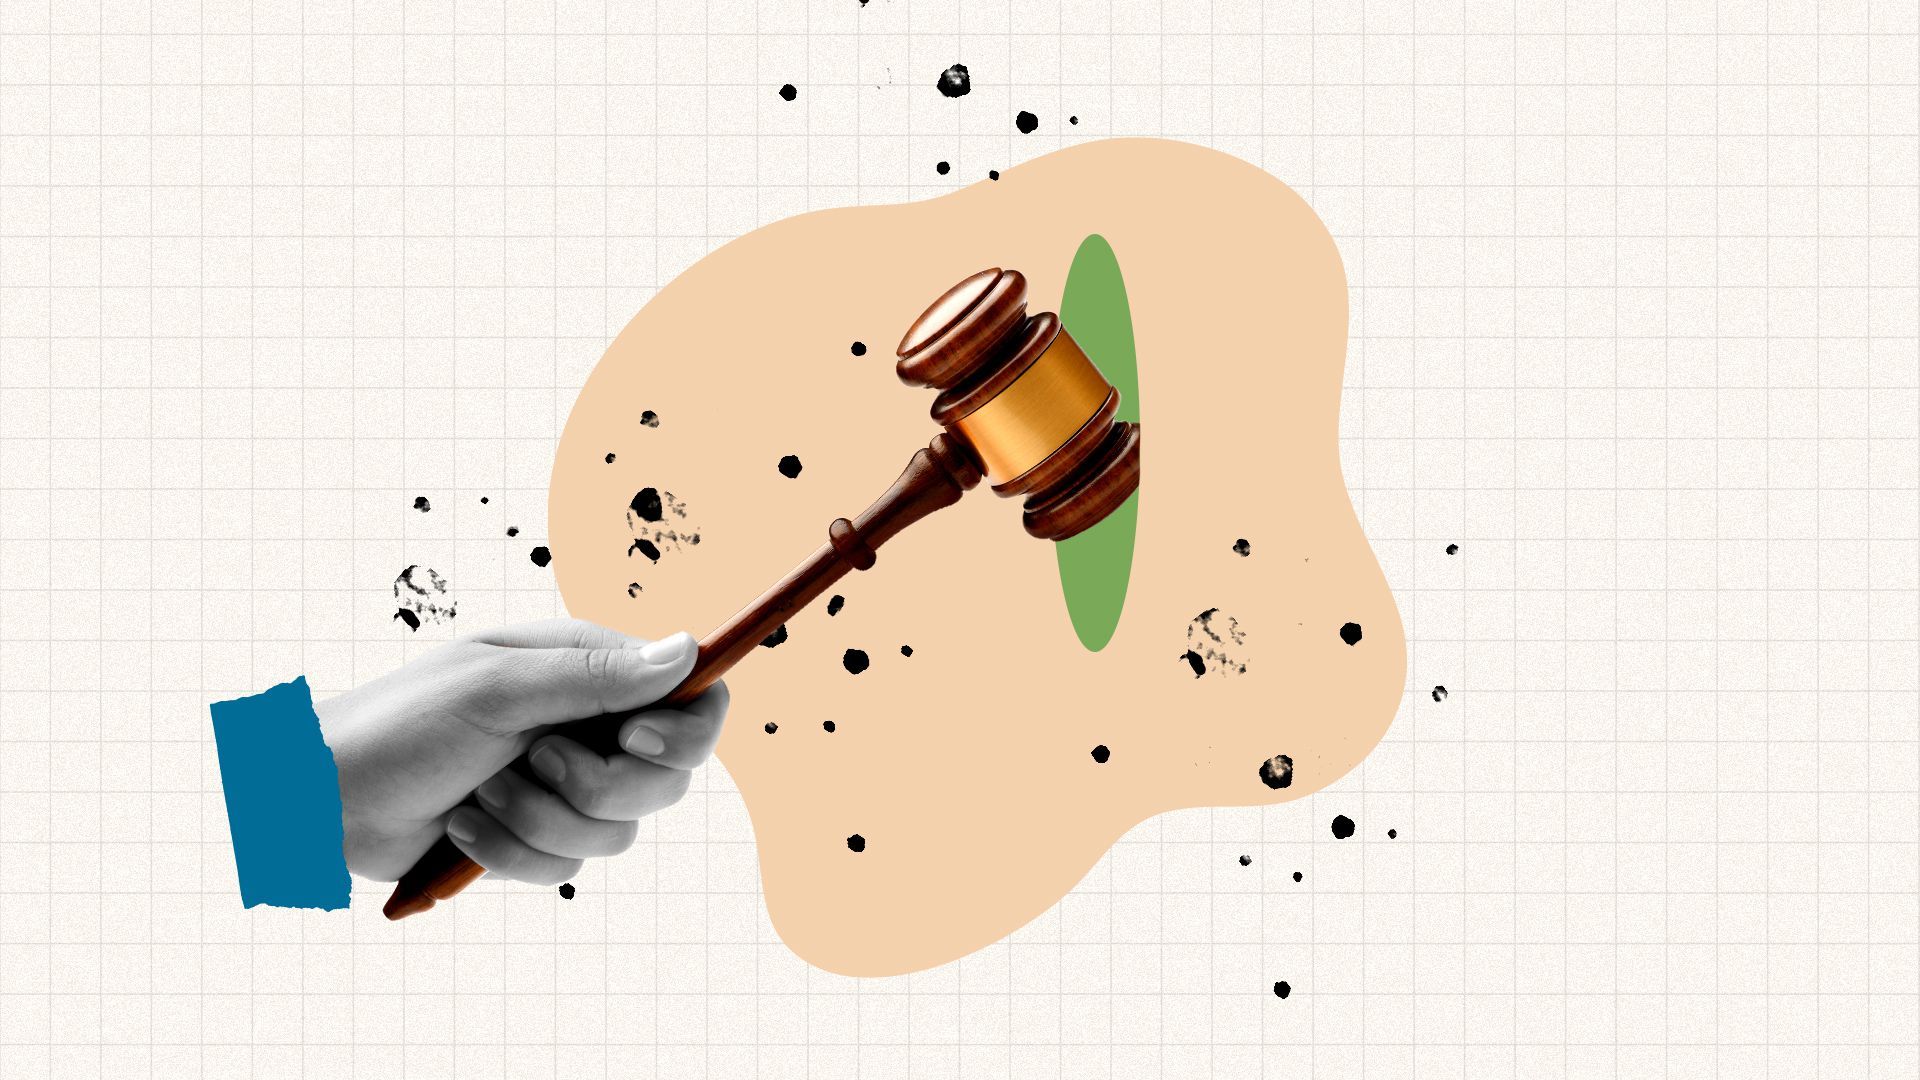 Illustrated collage of a hand holding a gavel surrounded by abstract shapes. 